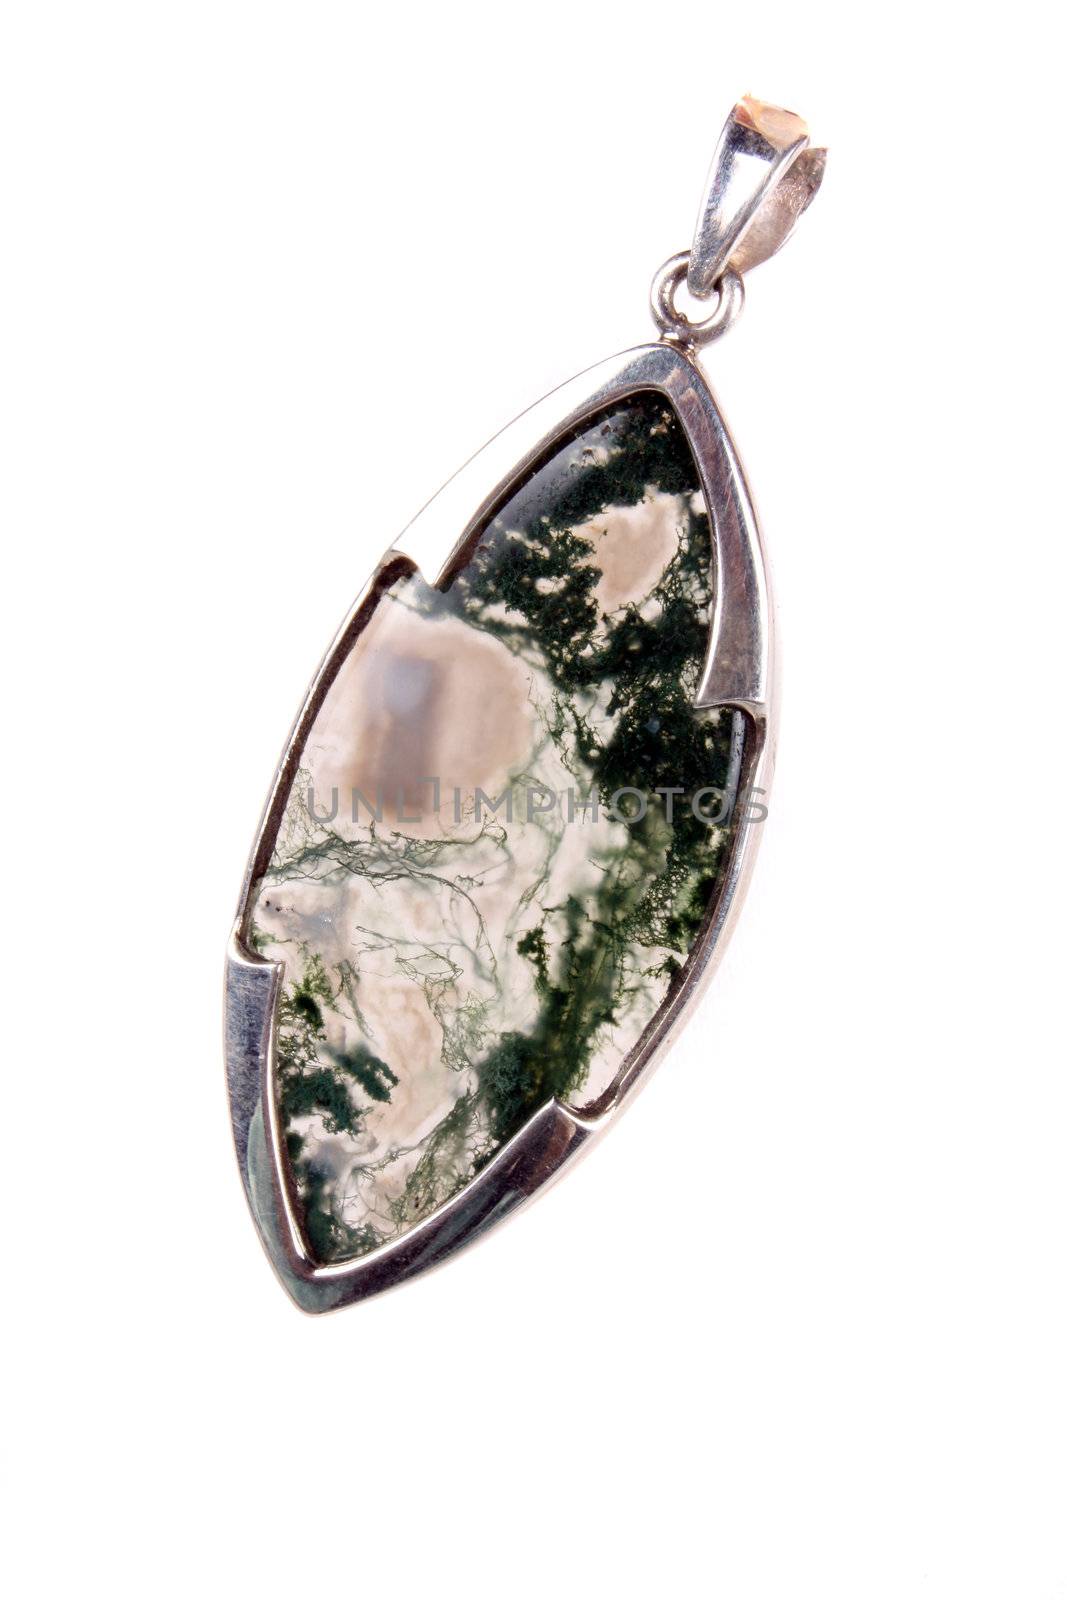 A Mosagate pendant made of silver used as jewelery or alternative therapies like crystal healing and astrology, isolated on white studio background.